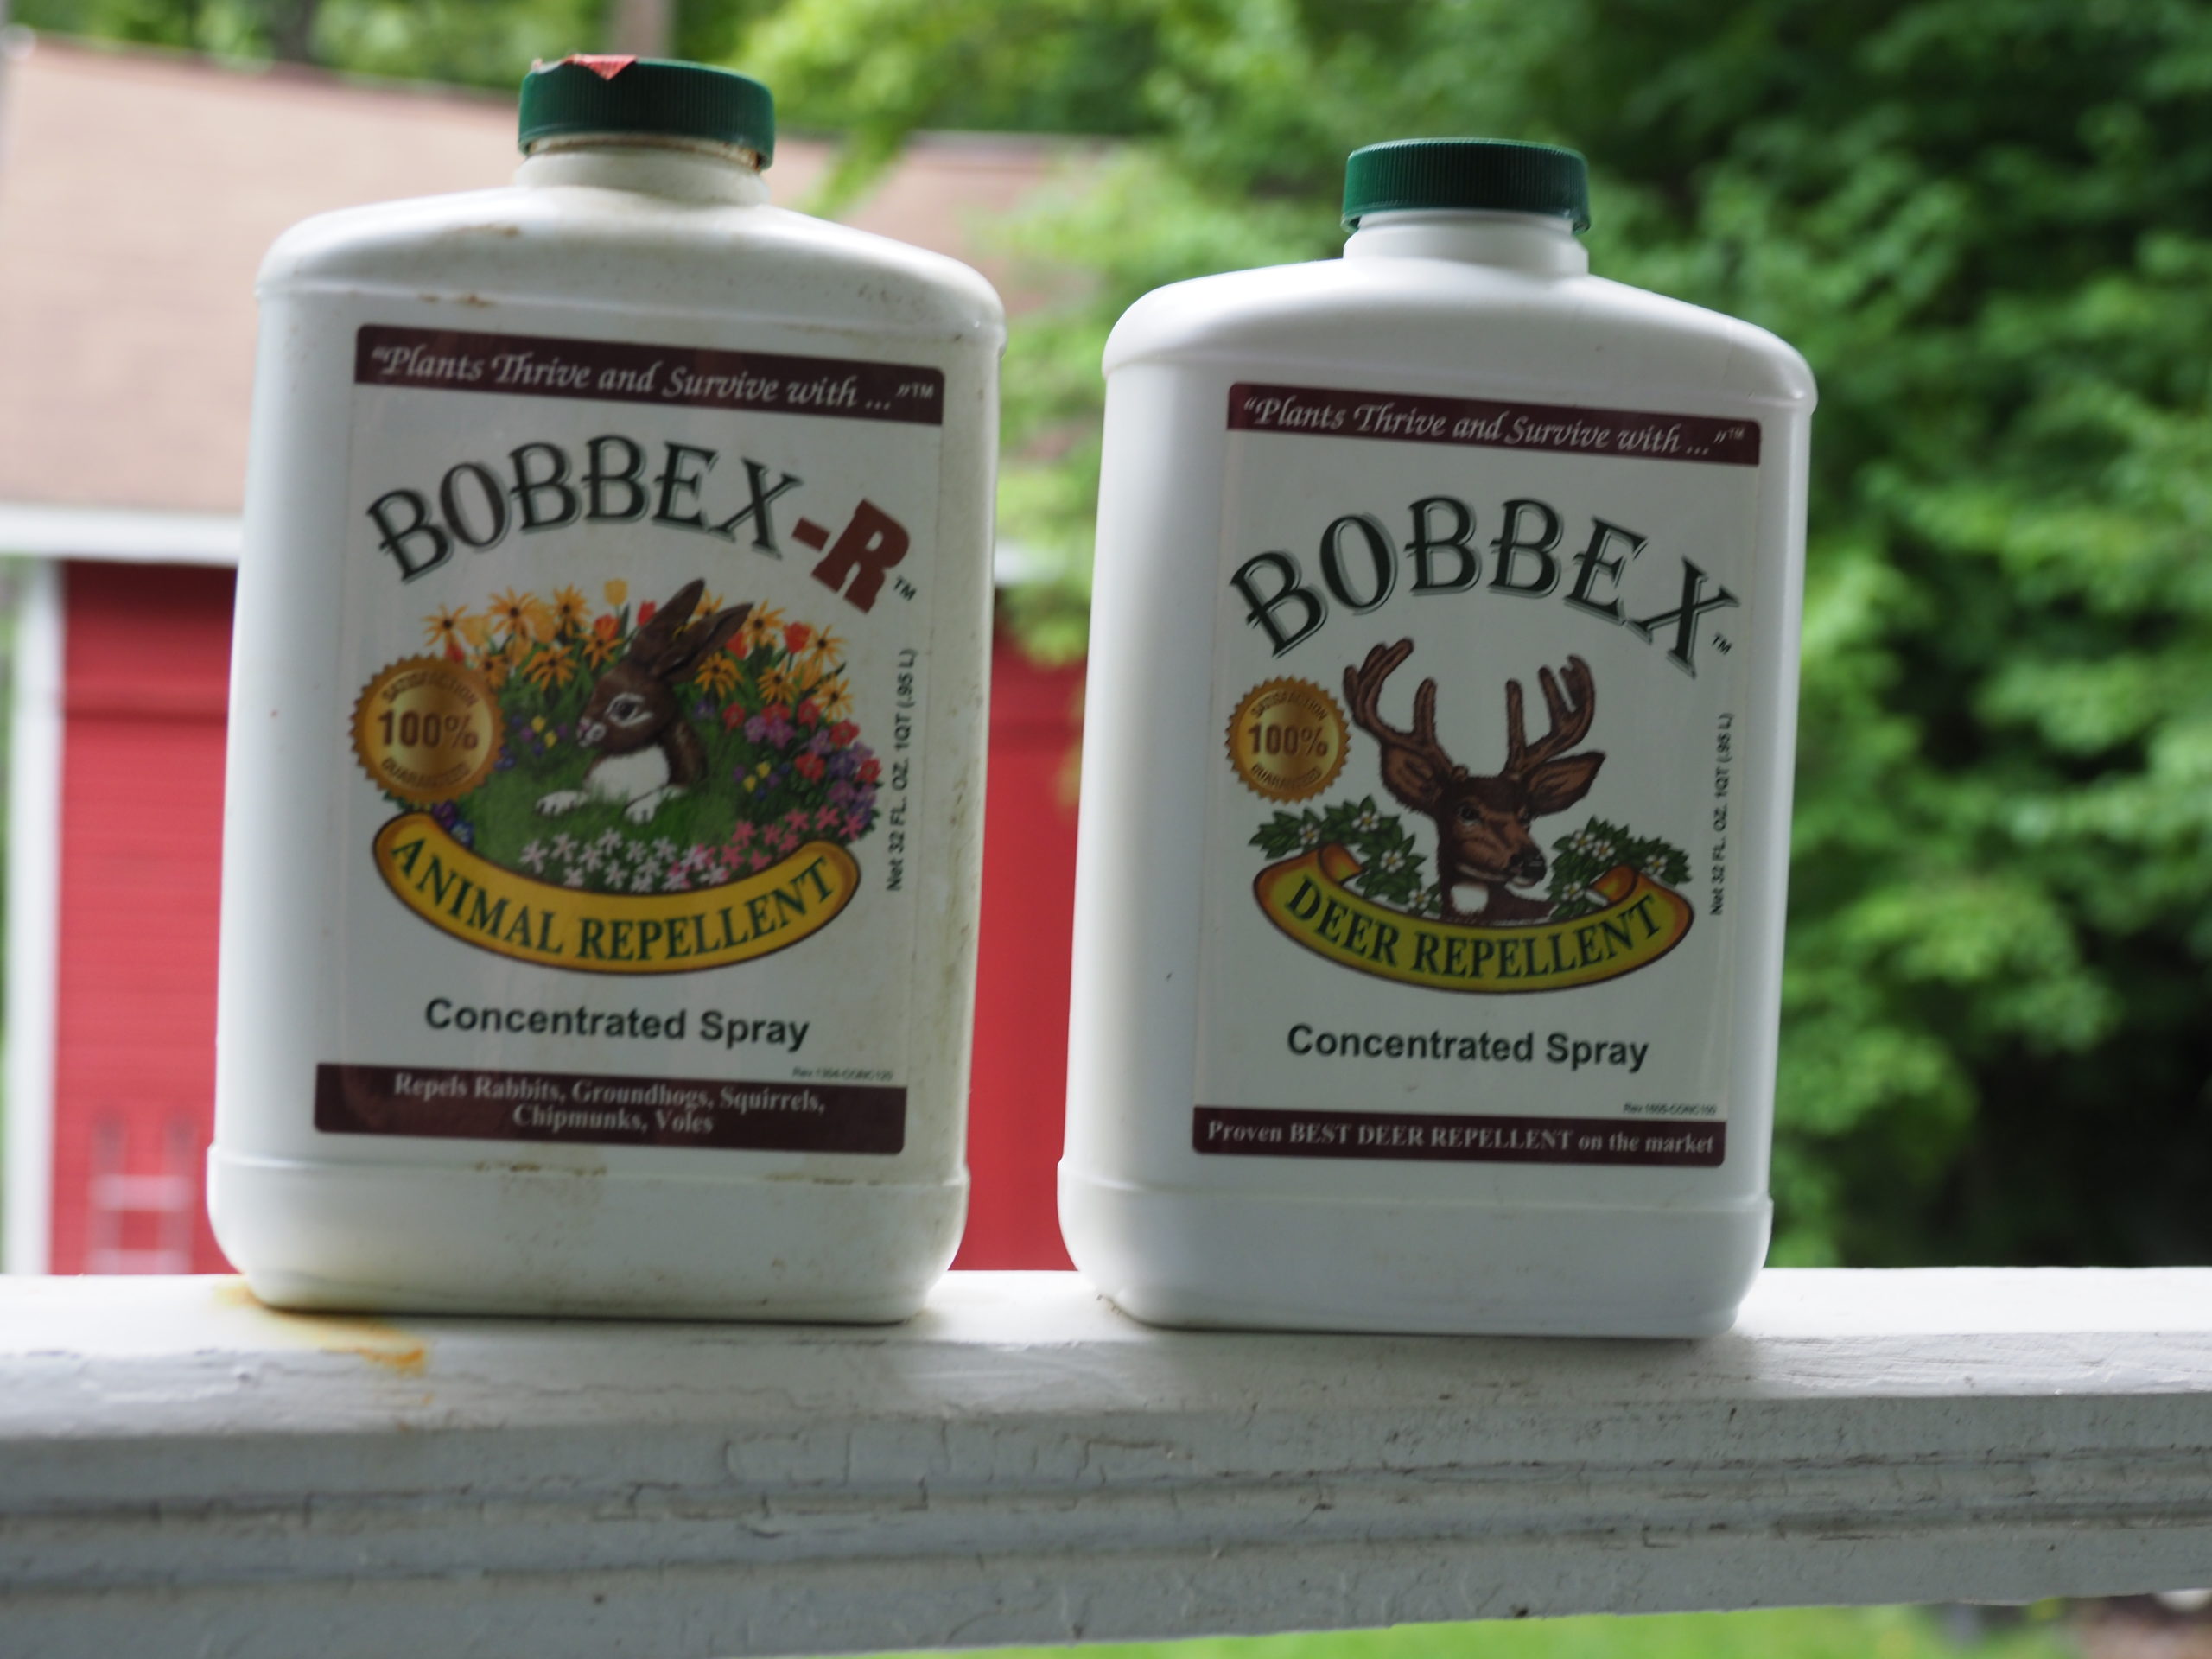 Only Bobbex-R (left) will work as a bulb dip to repel deer, mice, voles and squirrels. The dip only lasts for the first year, but in following years Bobbex-R can be used as a soil drench. The Bobbex on the right, the standard Bobbex, does not have the same repellency.